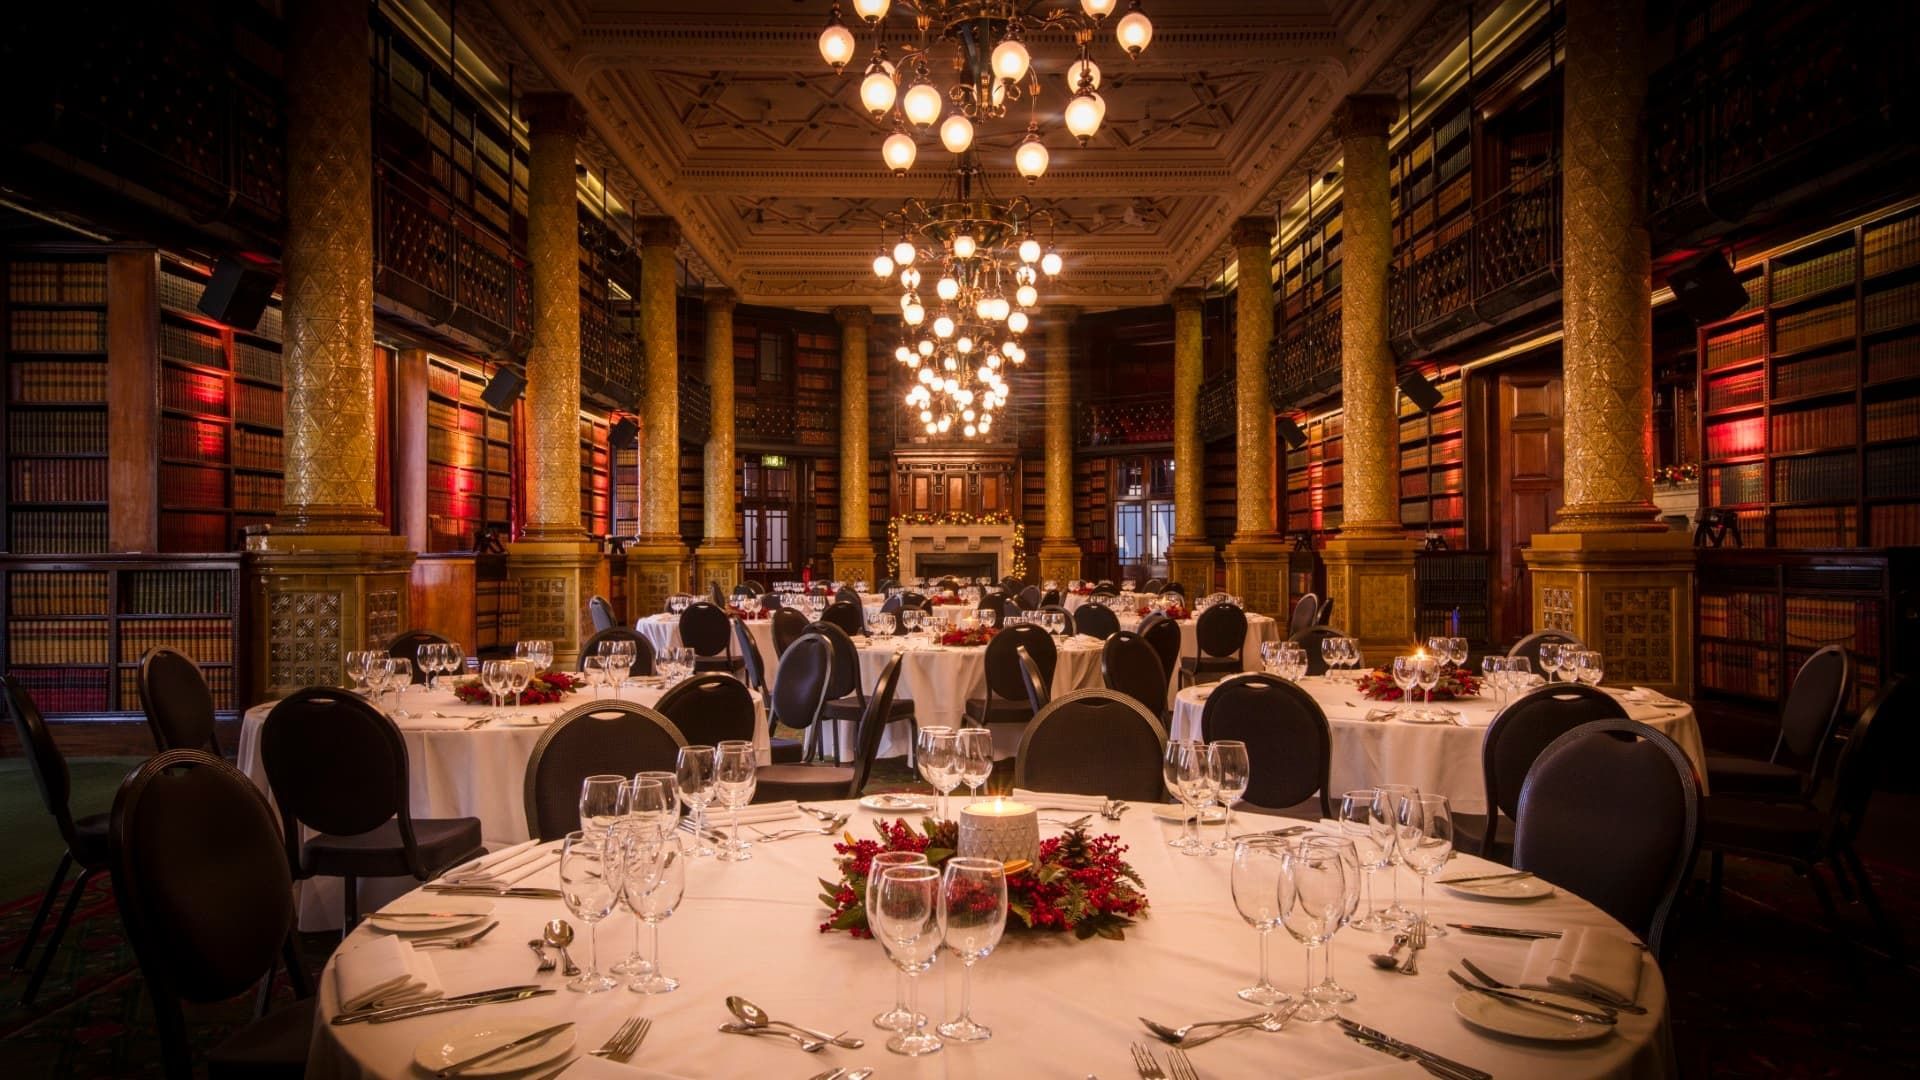 Have a ball in the Gladstone Library Royal Horseguards Hotel